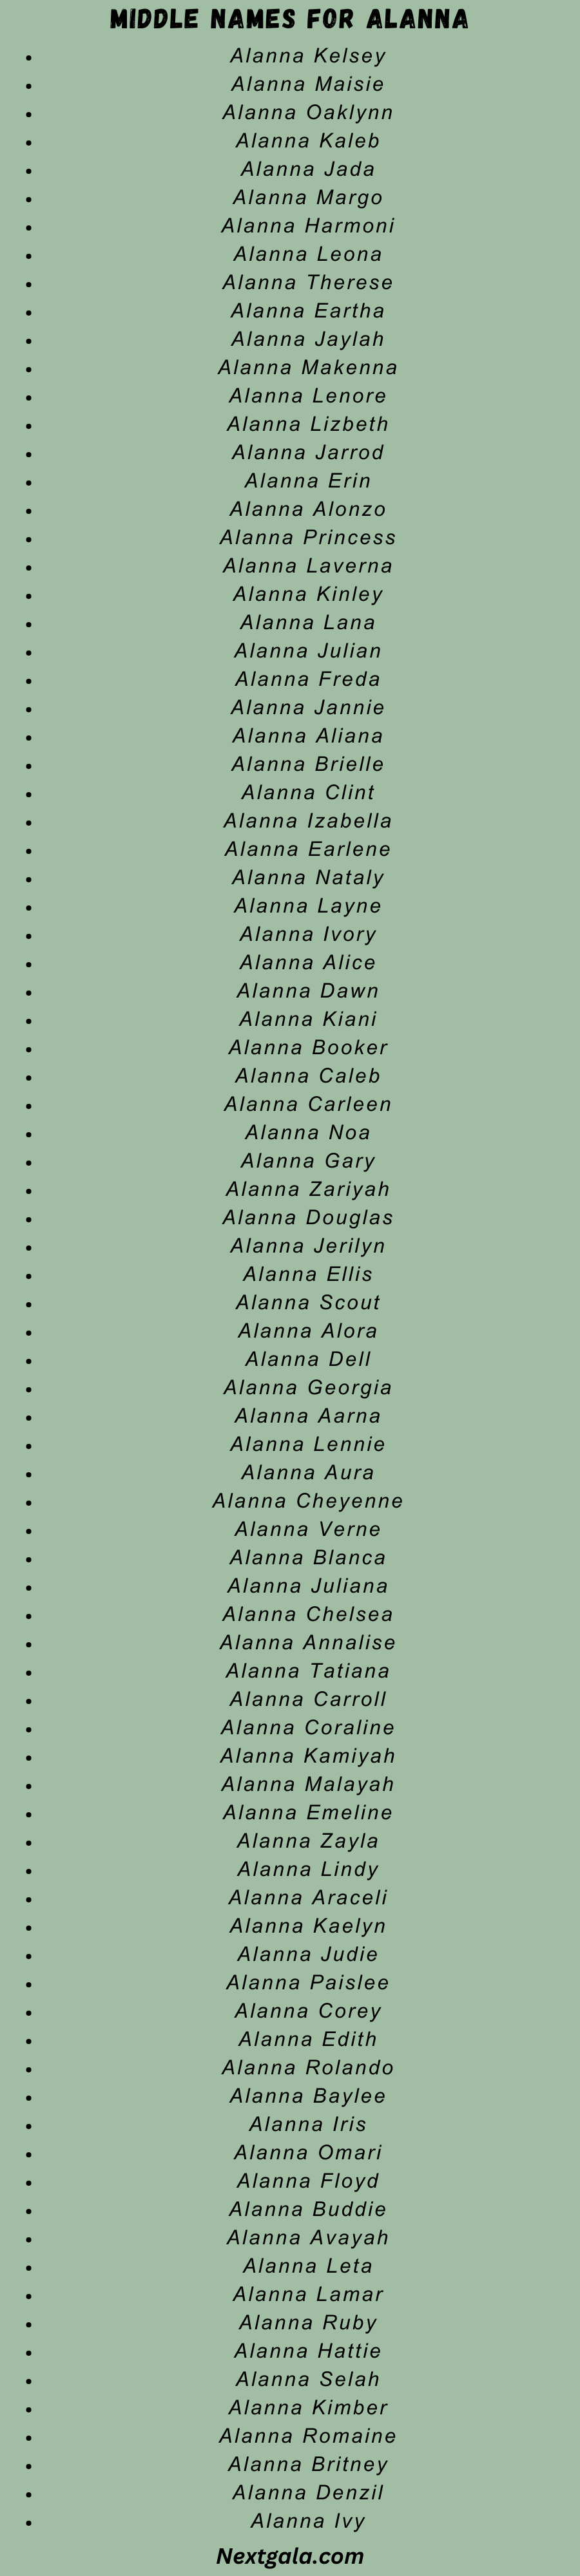 Middle Names for Alanna